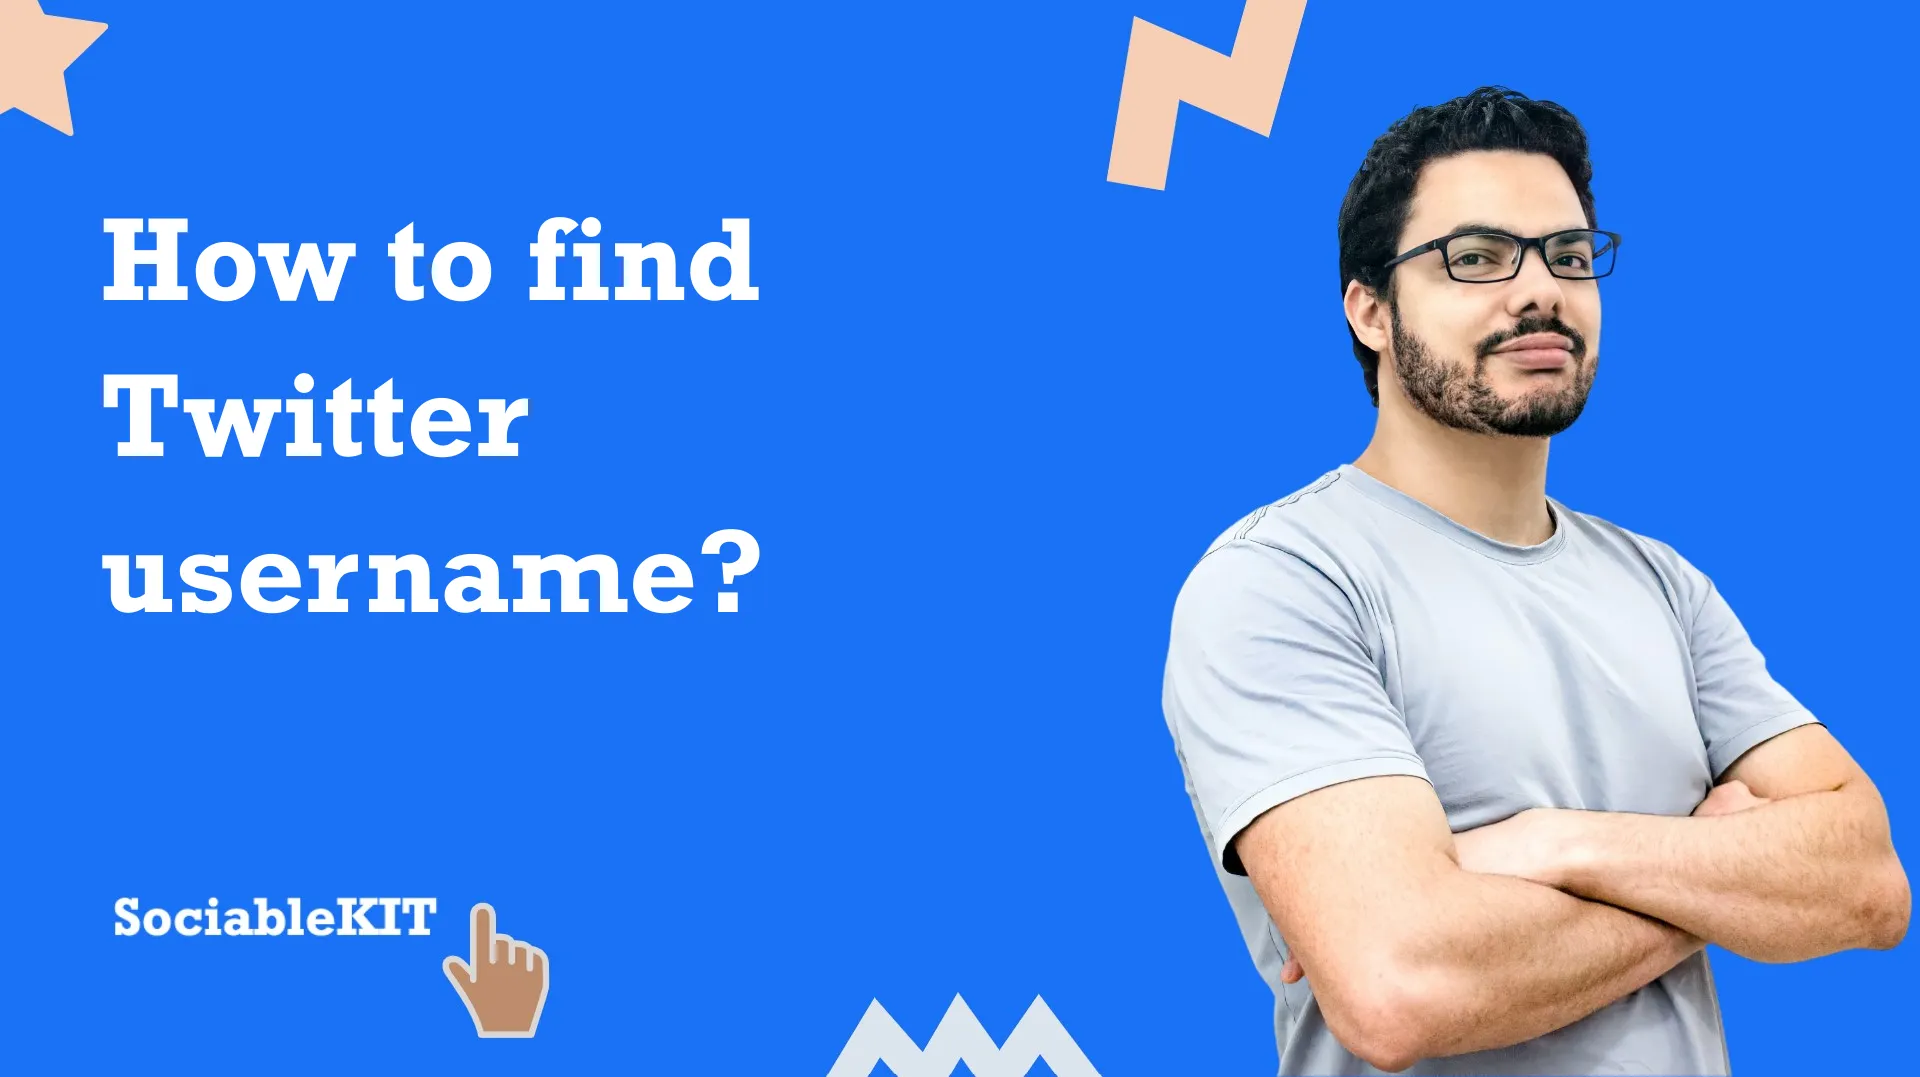 How to find Twitter username?